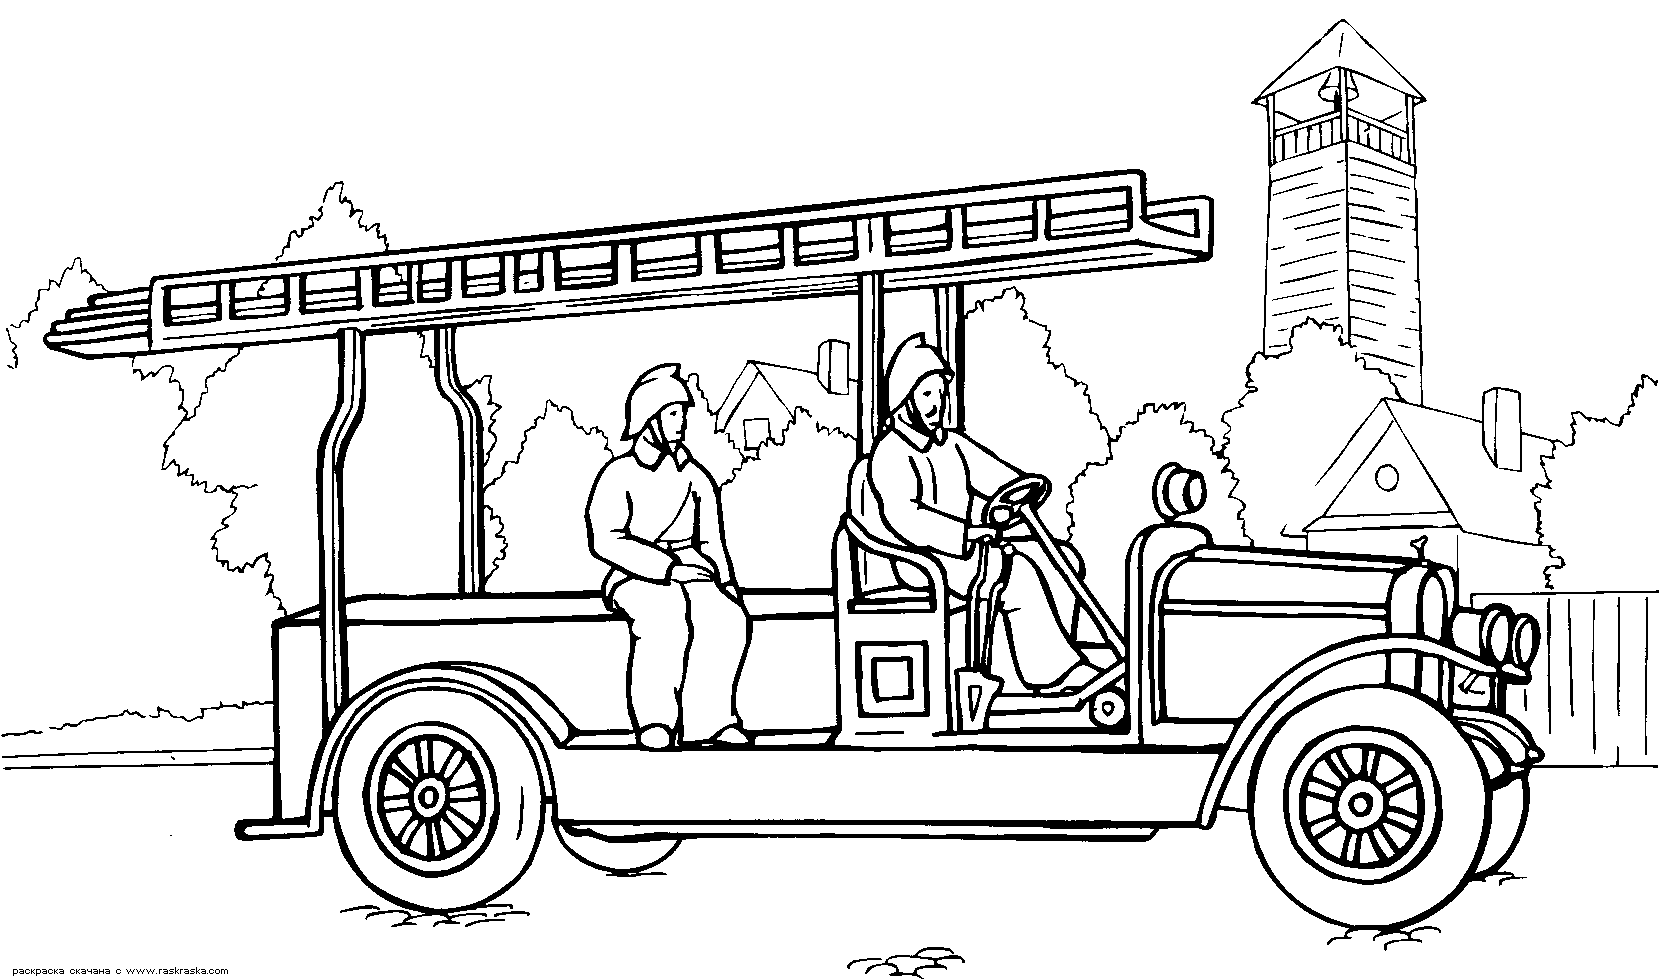 Download Coloring page - Fire-engine vehicle